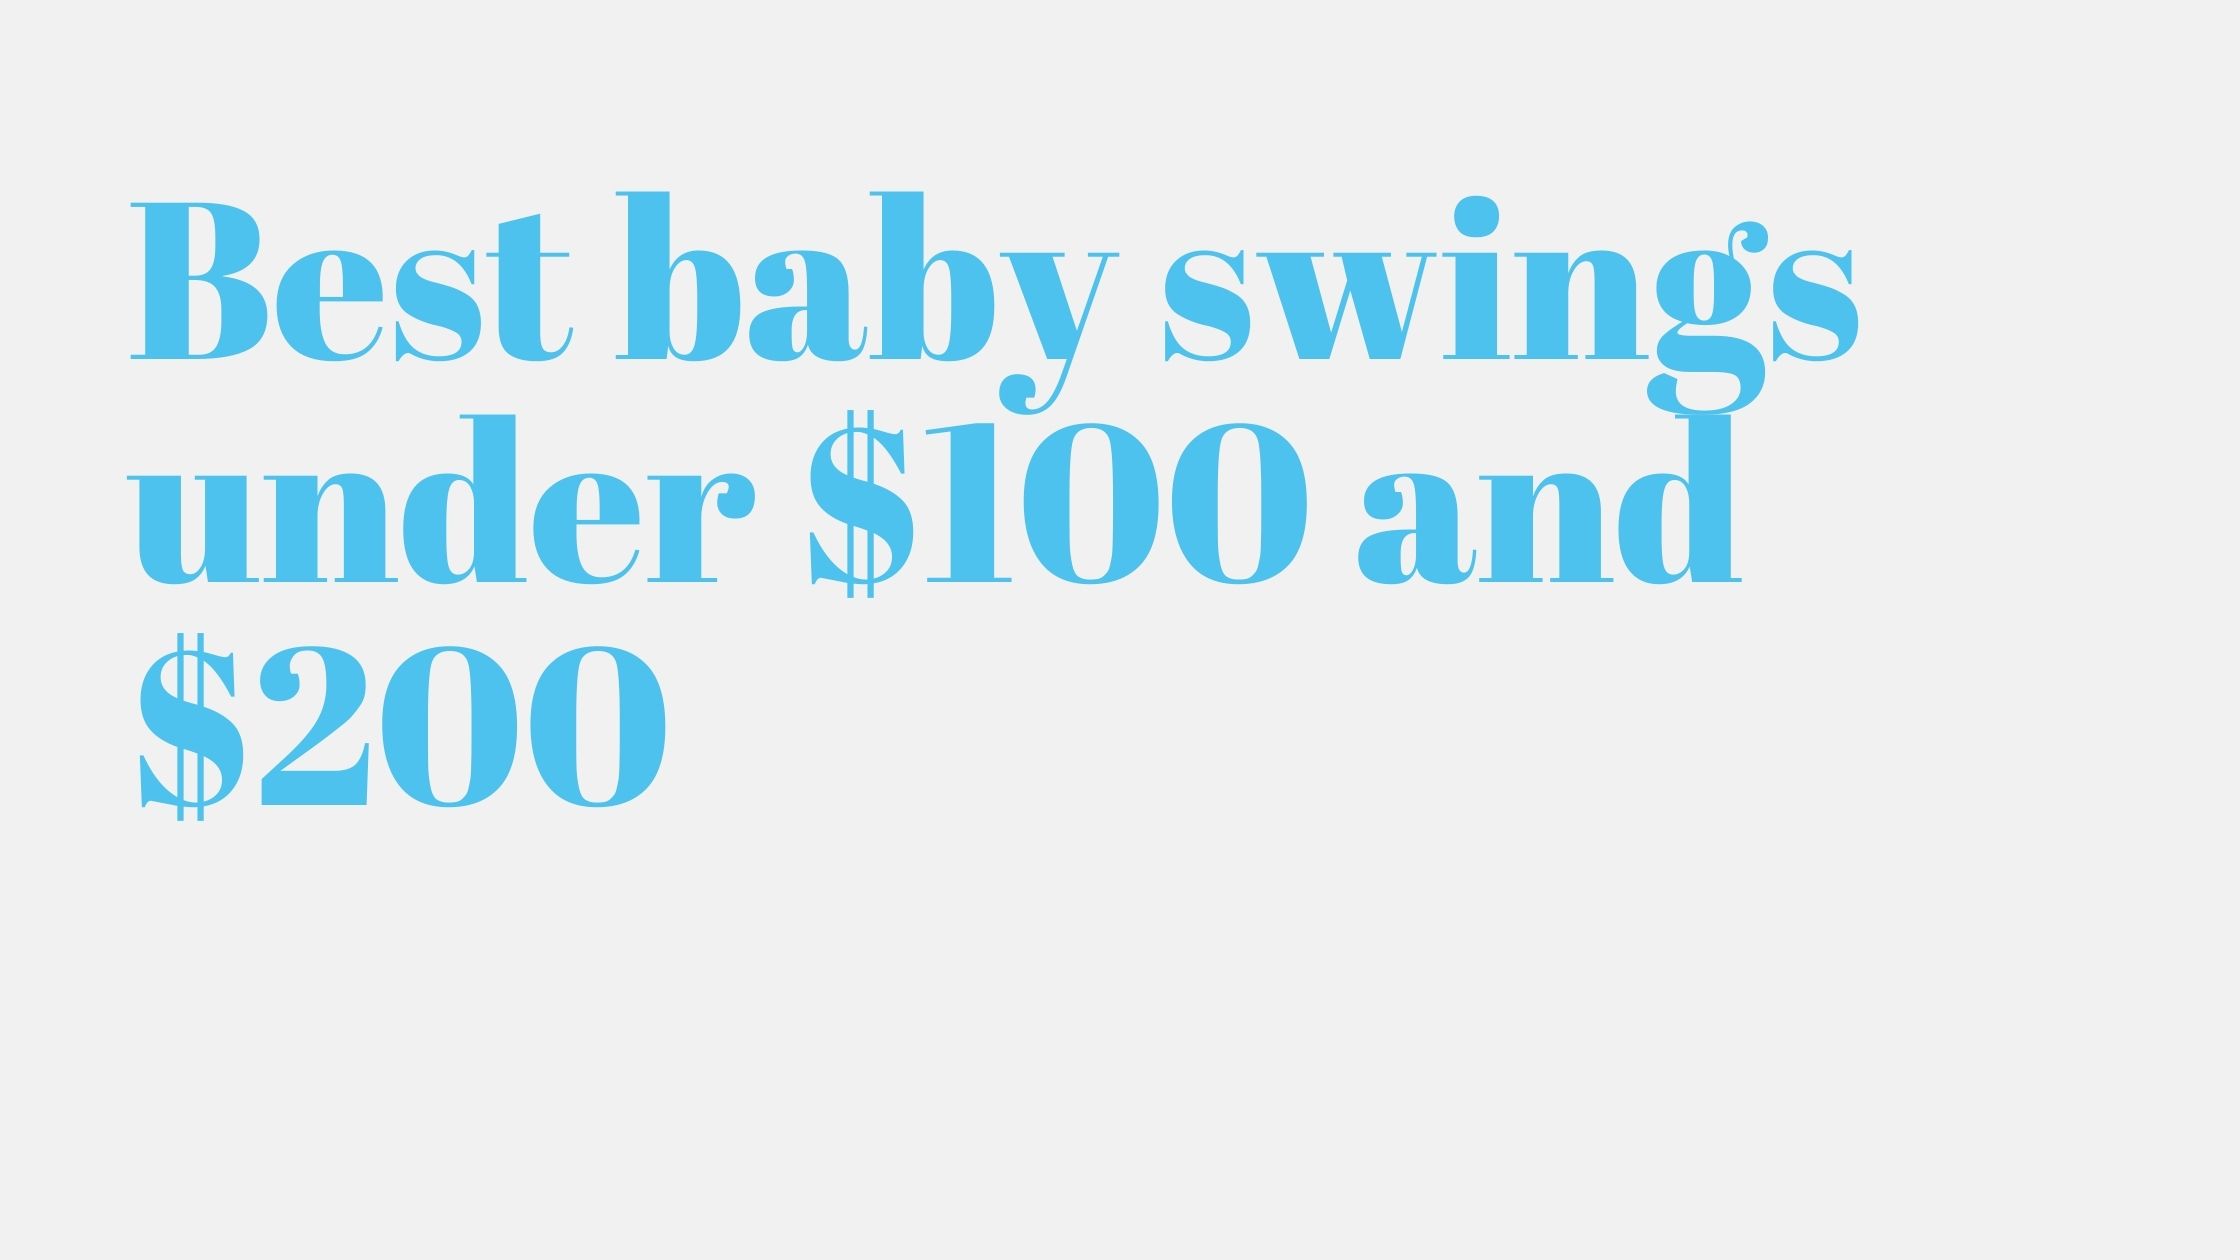 You are currently viewing 11 Best baby swings under $100 and $200